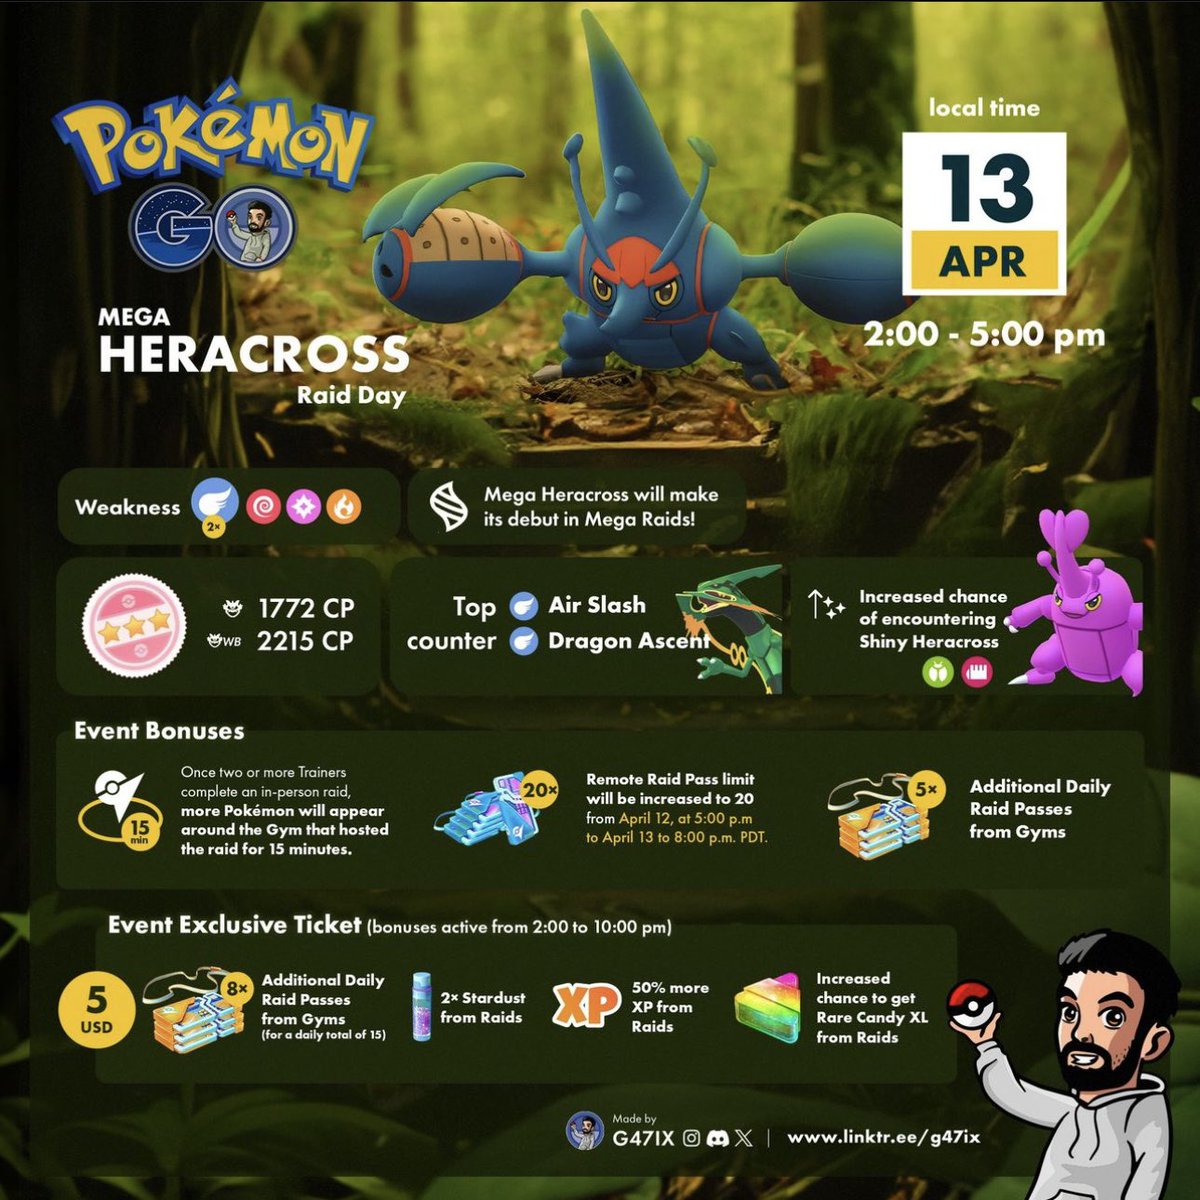 🦋 Mega Heracross 🐞 makes it’s way into raids on April 13th! This is your chance to battle the Herculean 'mon and maybe catch a shiny. Are your Pokémon battle-ready? #MegaHeracross #PokemonGORaid #PokemonGo #HeraWhat